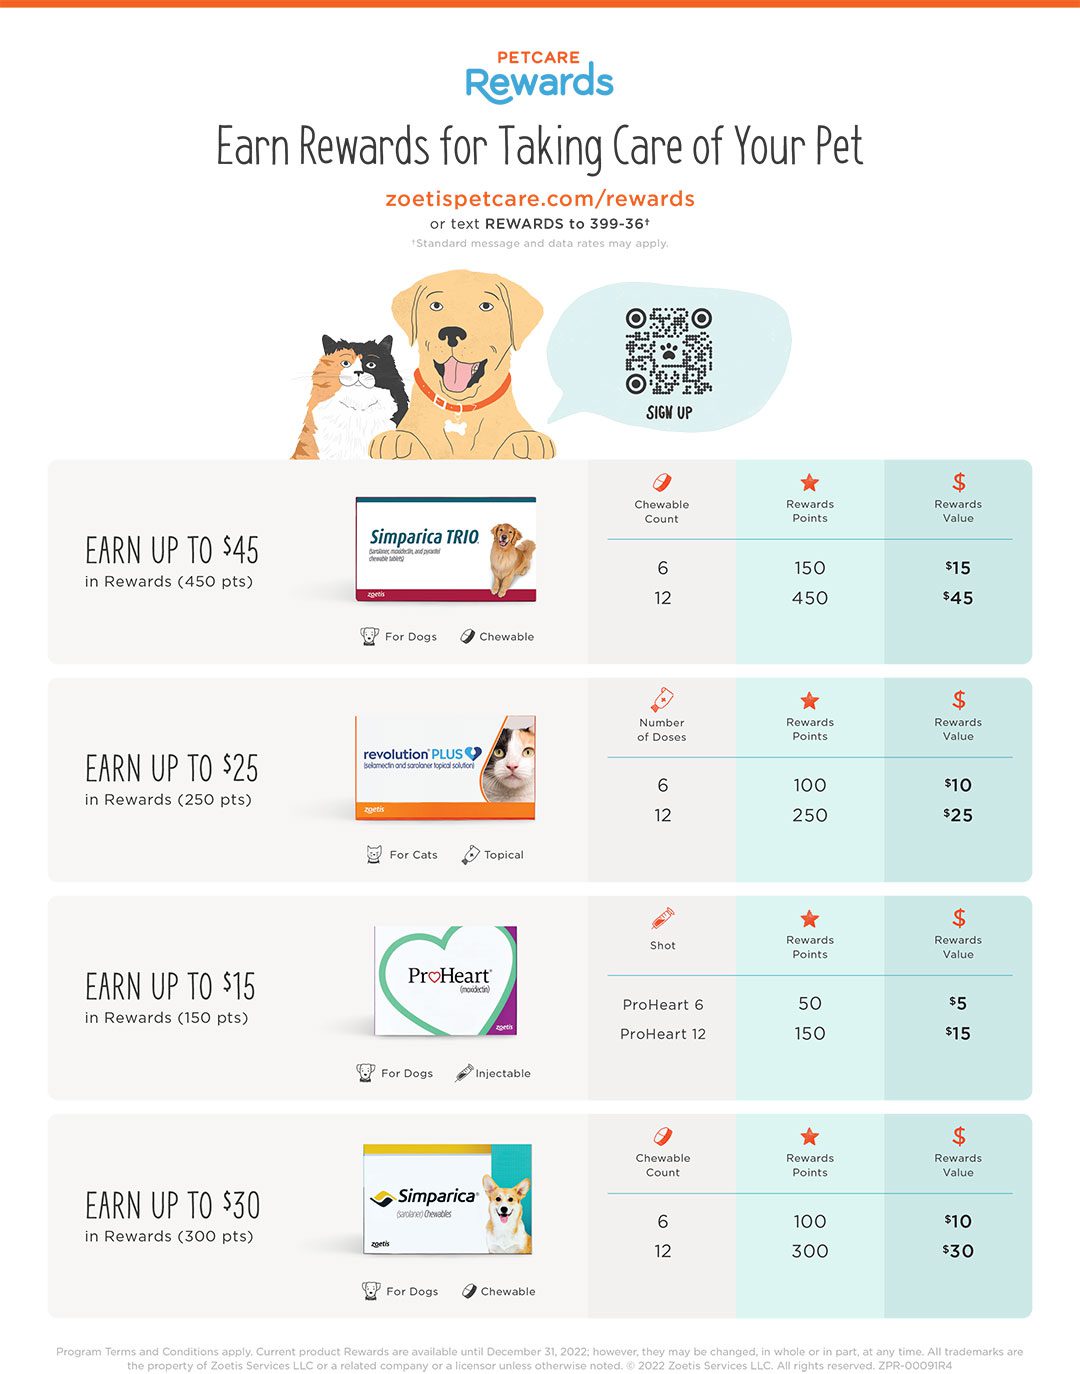 earn rewards for taking care of your pet